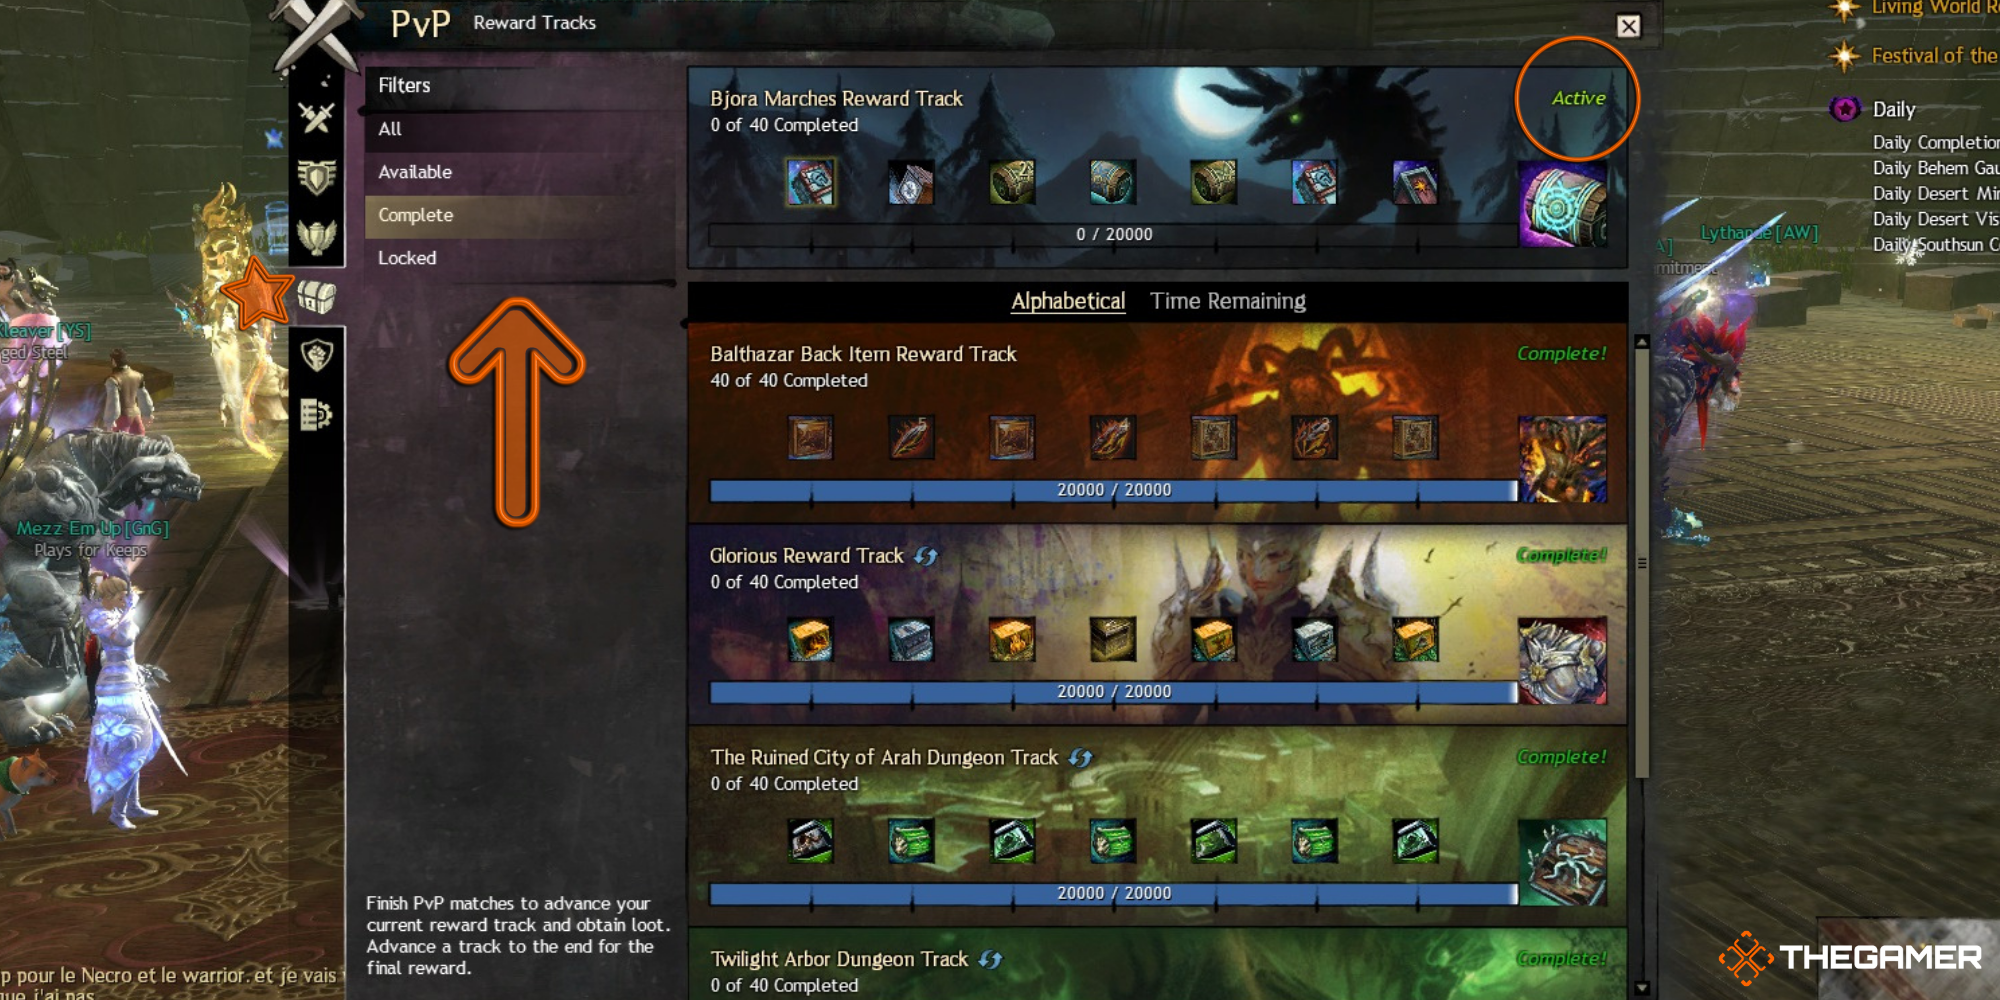 GW2 - Screenshot showing the player the details of the Rewards Track tab on the PvP menu